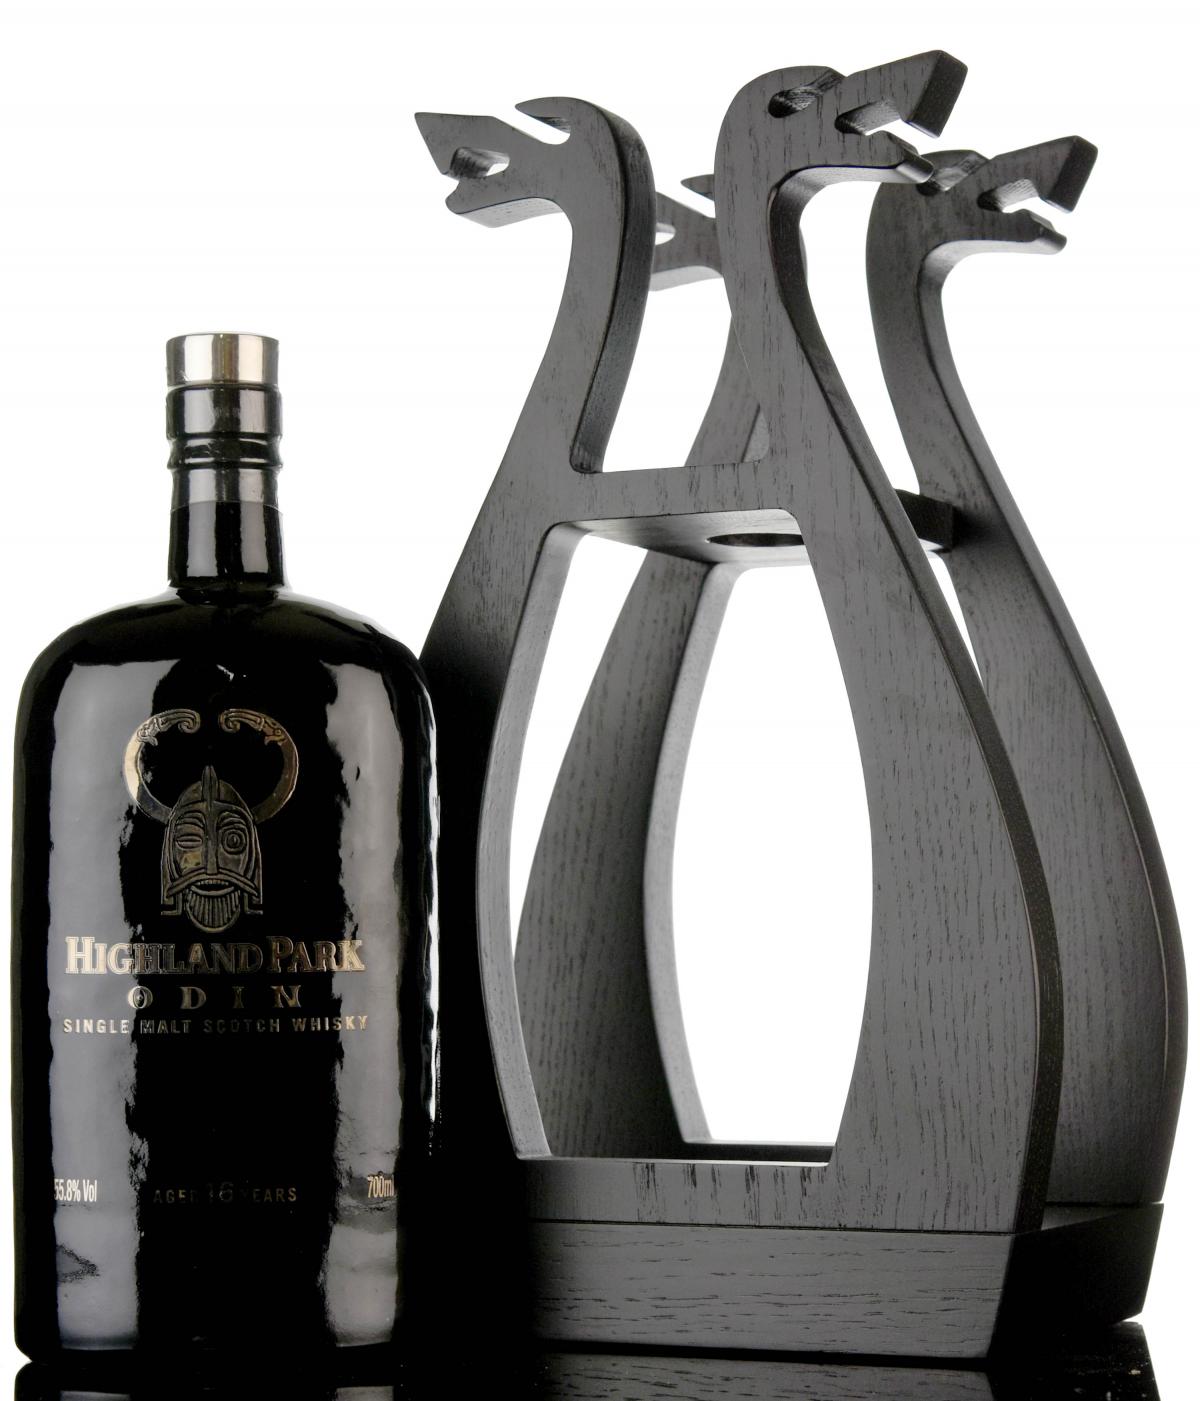 Highland Park 16 Year Old - Odin Valhalla Collection